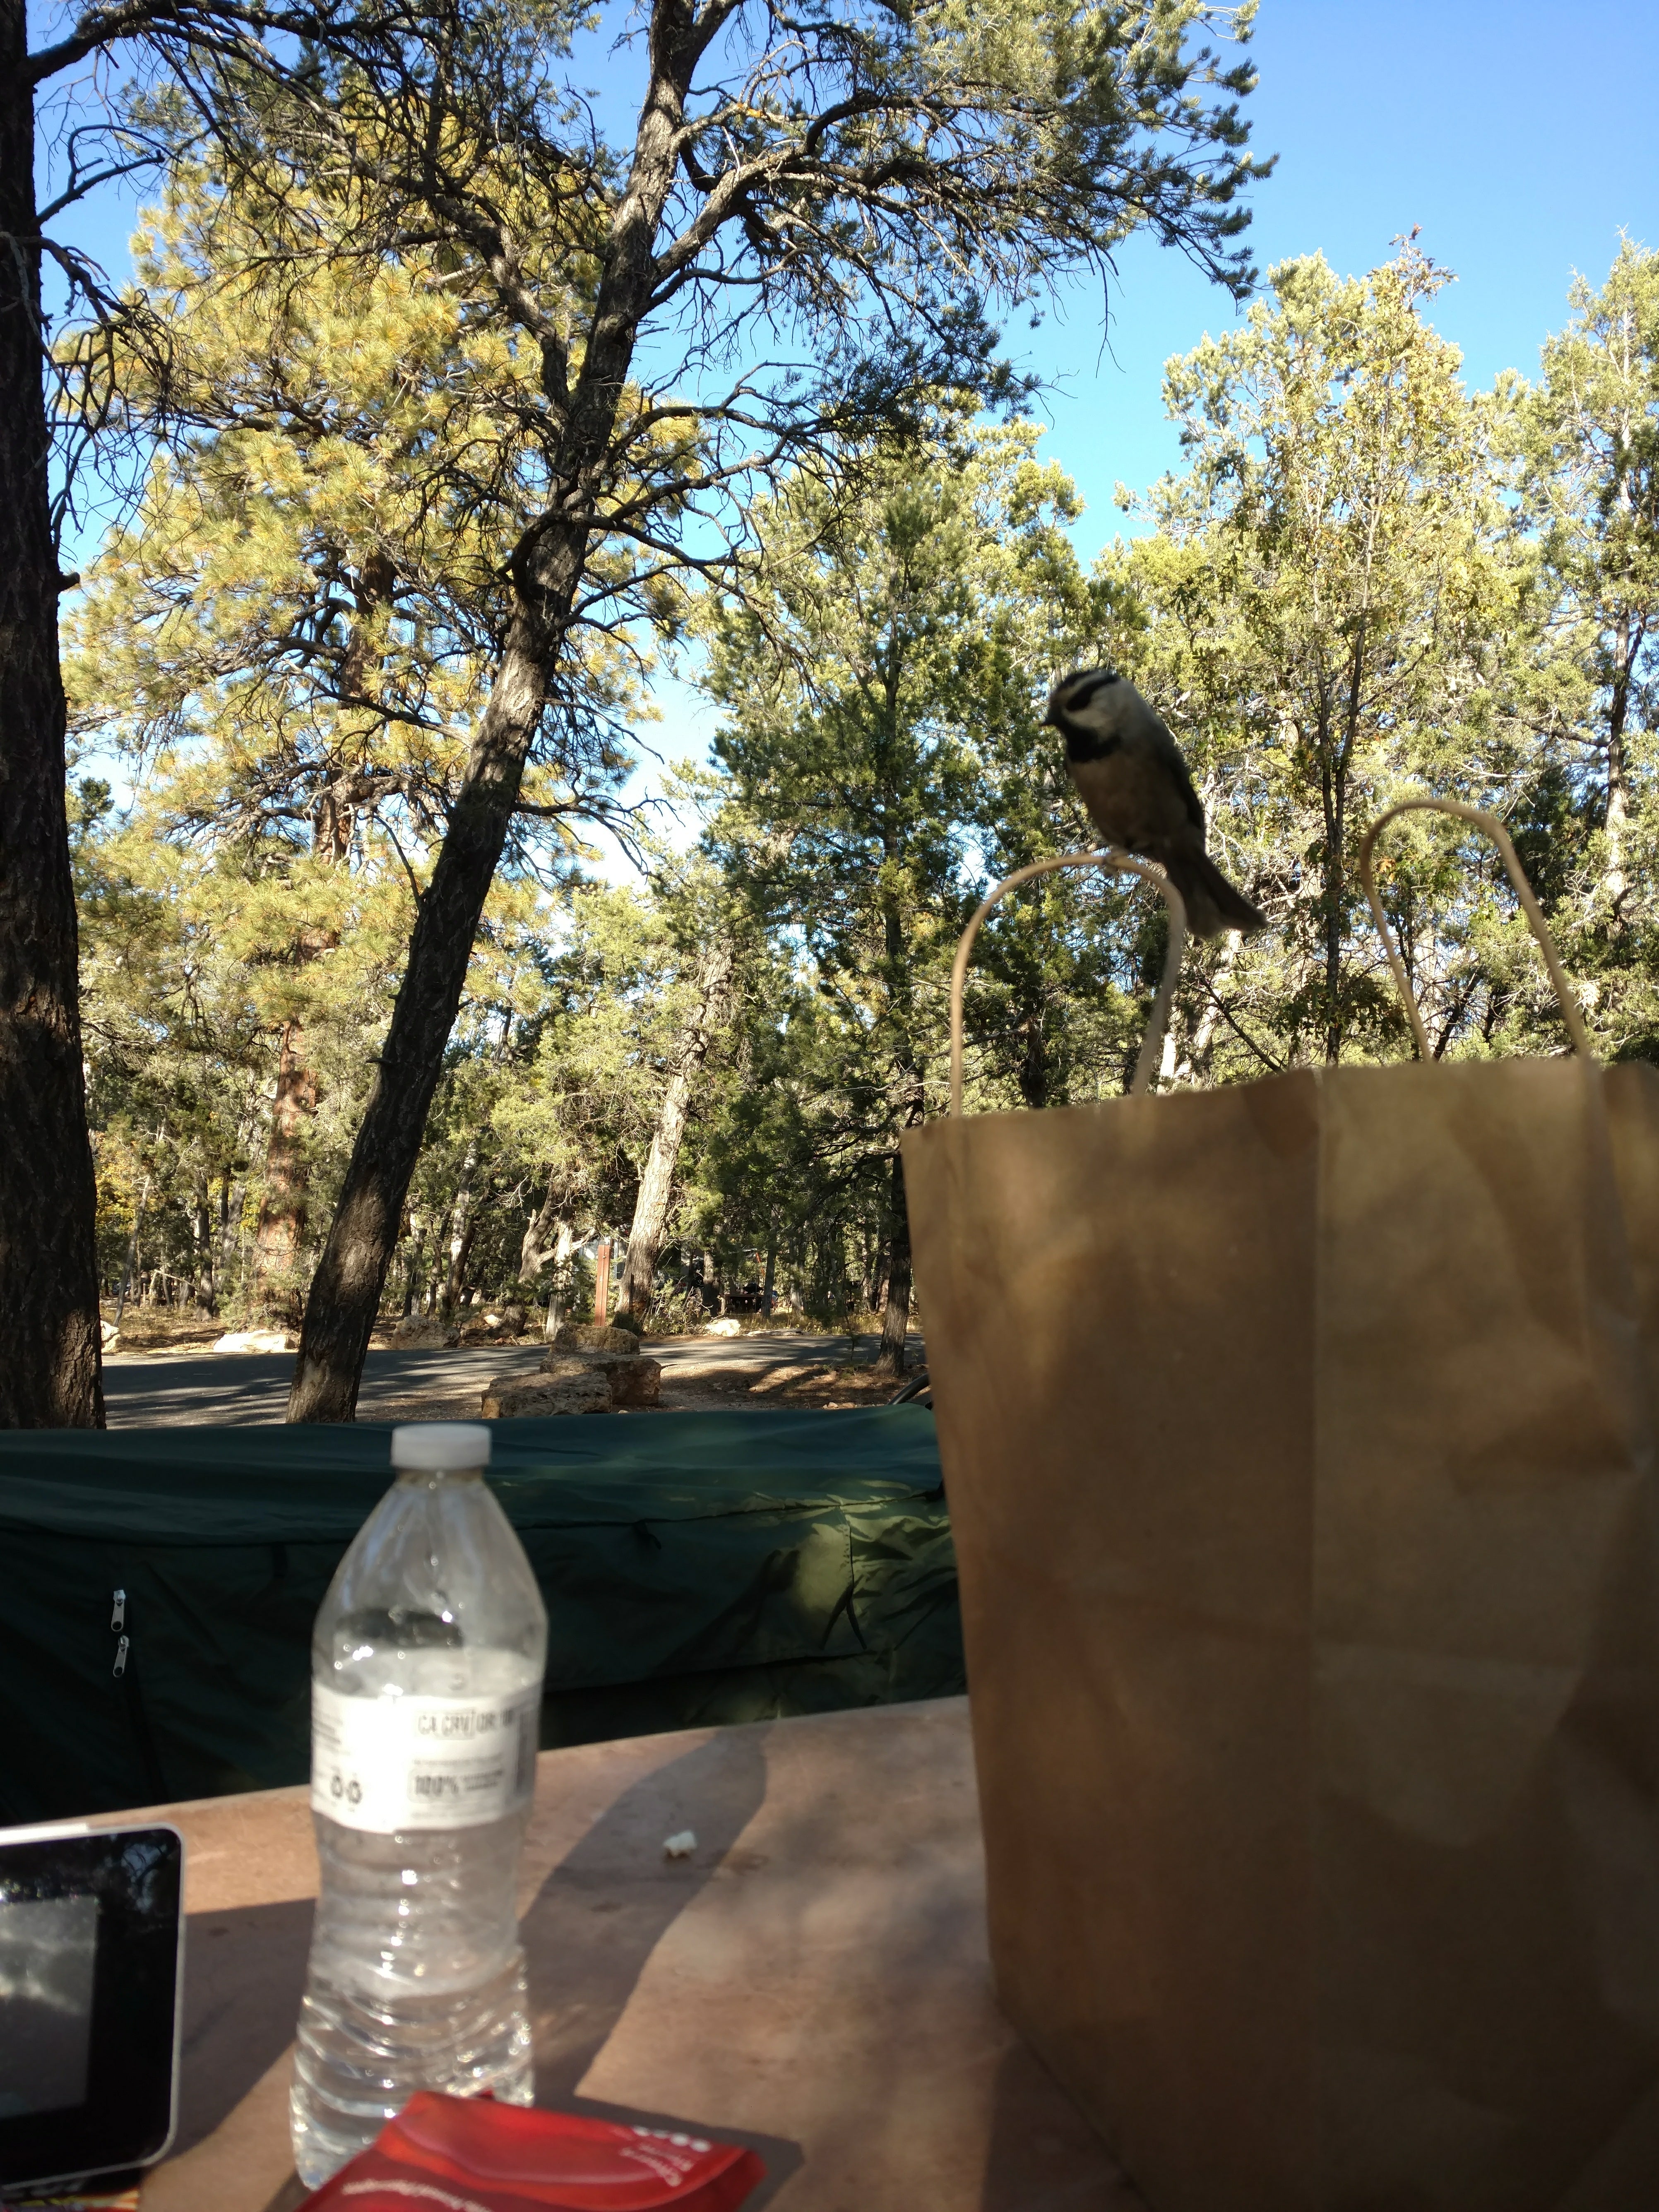 This was a one legged bird that landed on my bag while I was eating a late lunch at my camp table.